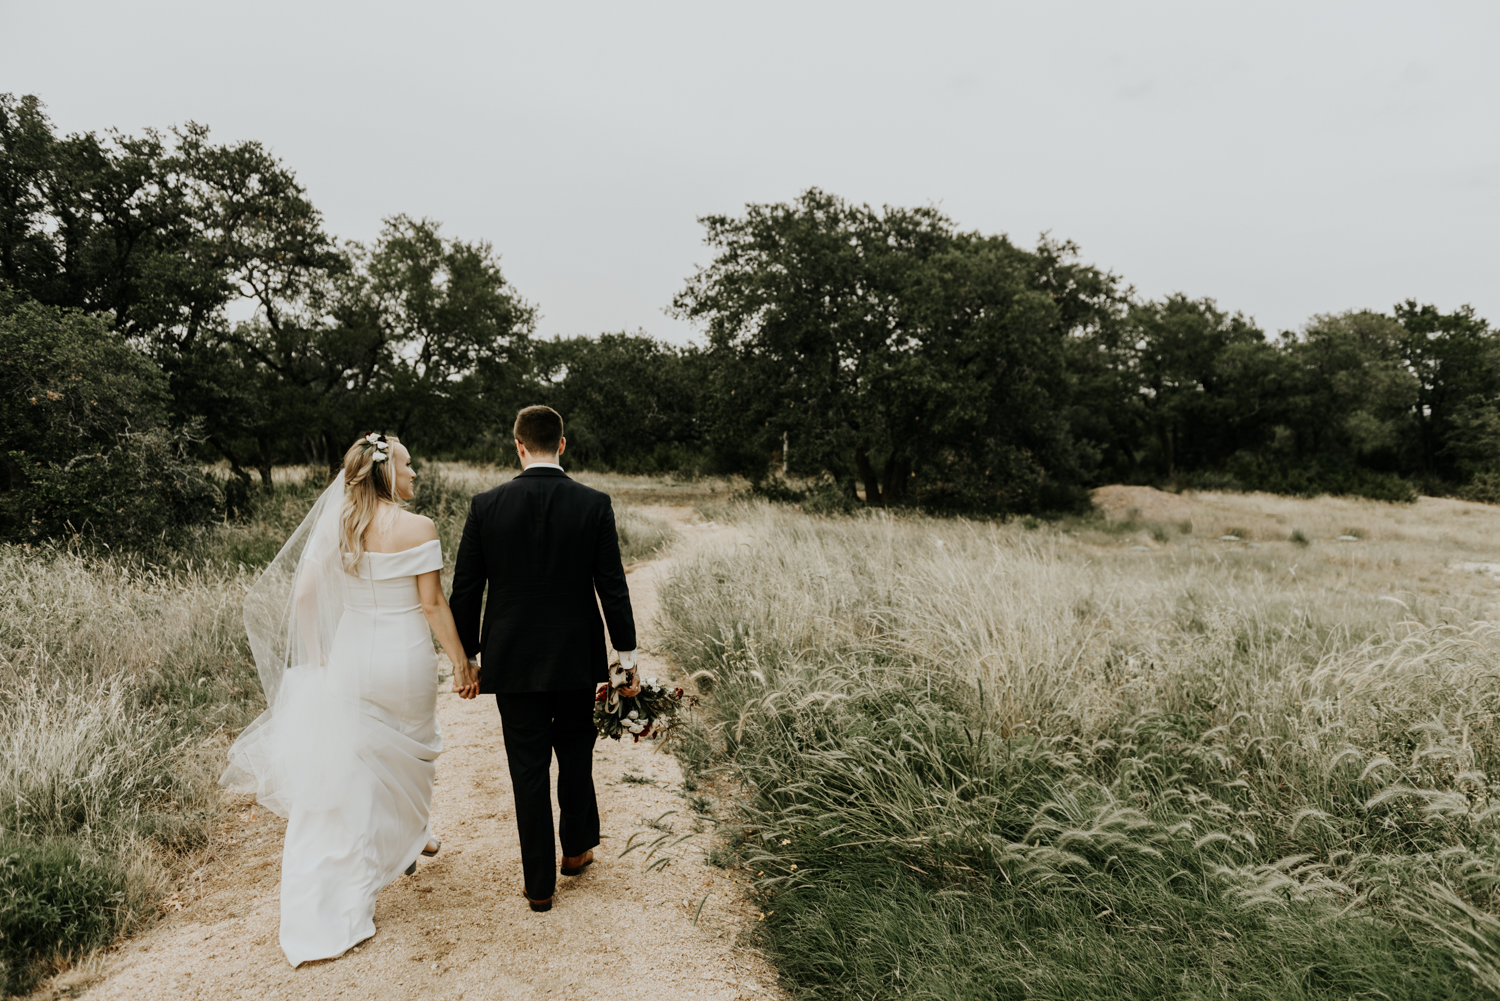 Boho Modern Wedding at the Prospect House in Dripping Springs, Texas